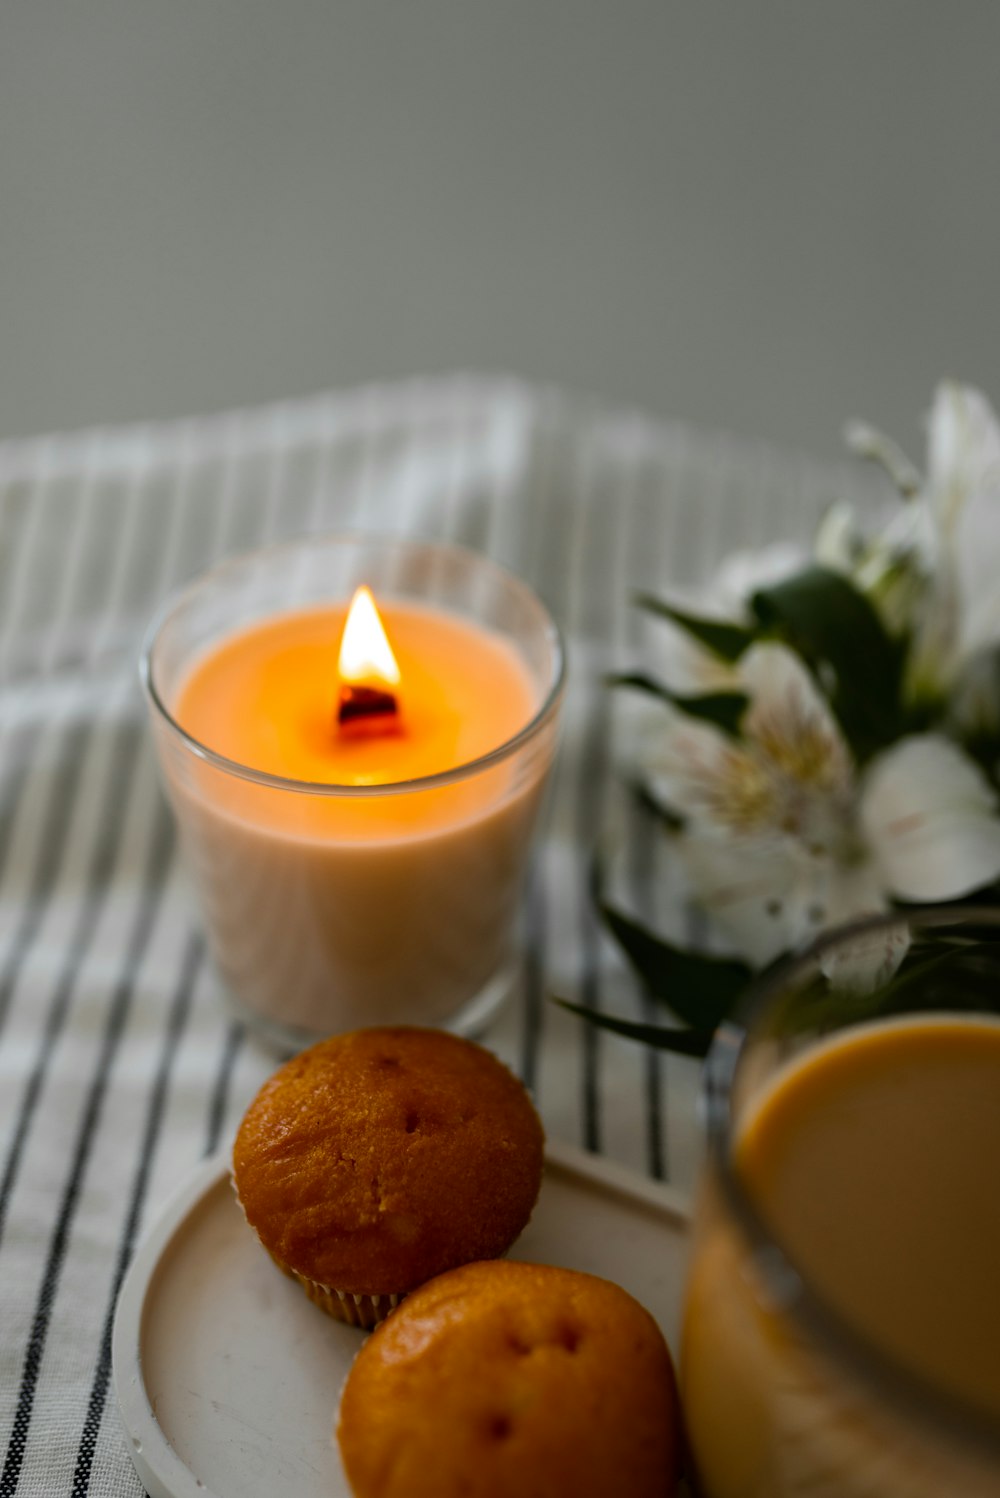 a plate with a muffin and a candle on it